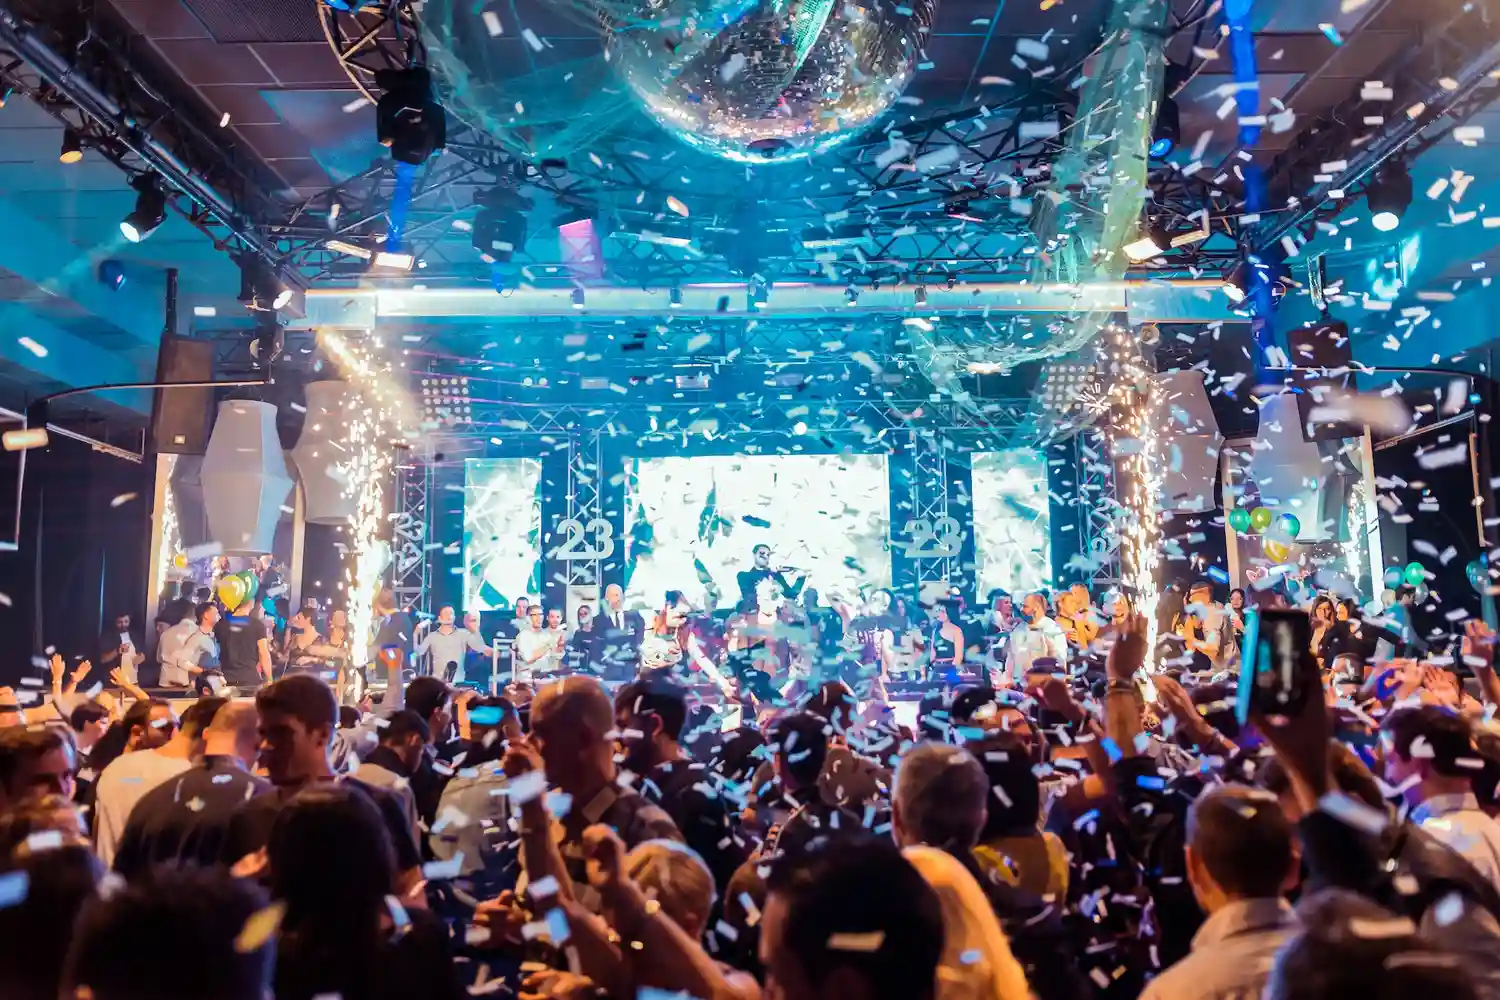 Vegas Nightlife For Couples: What Are The Best Clubs?